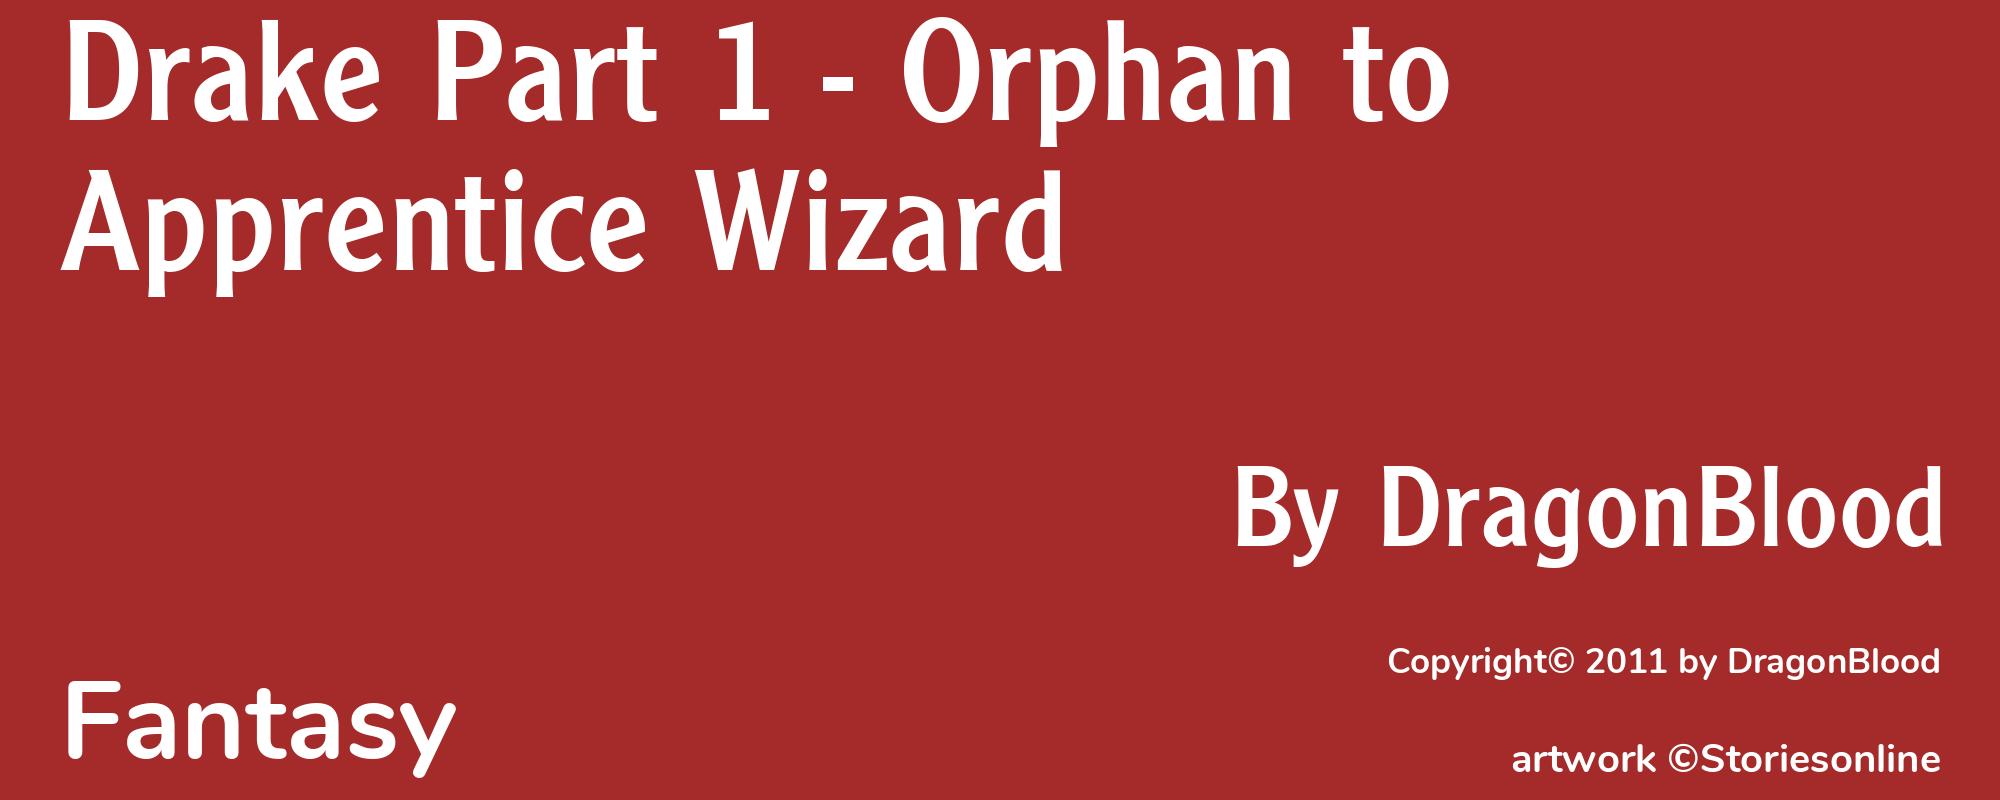 Drake Part 1 - Orphan to Apprentice Wizard - Cover